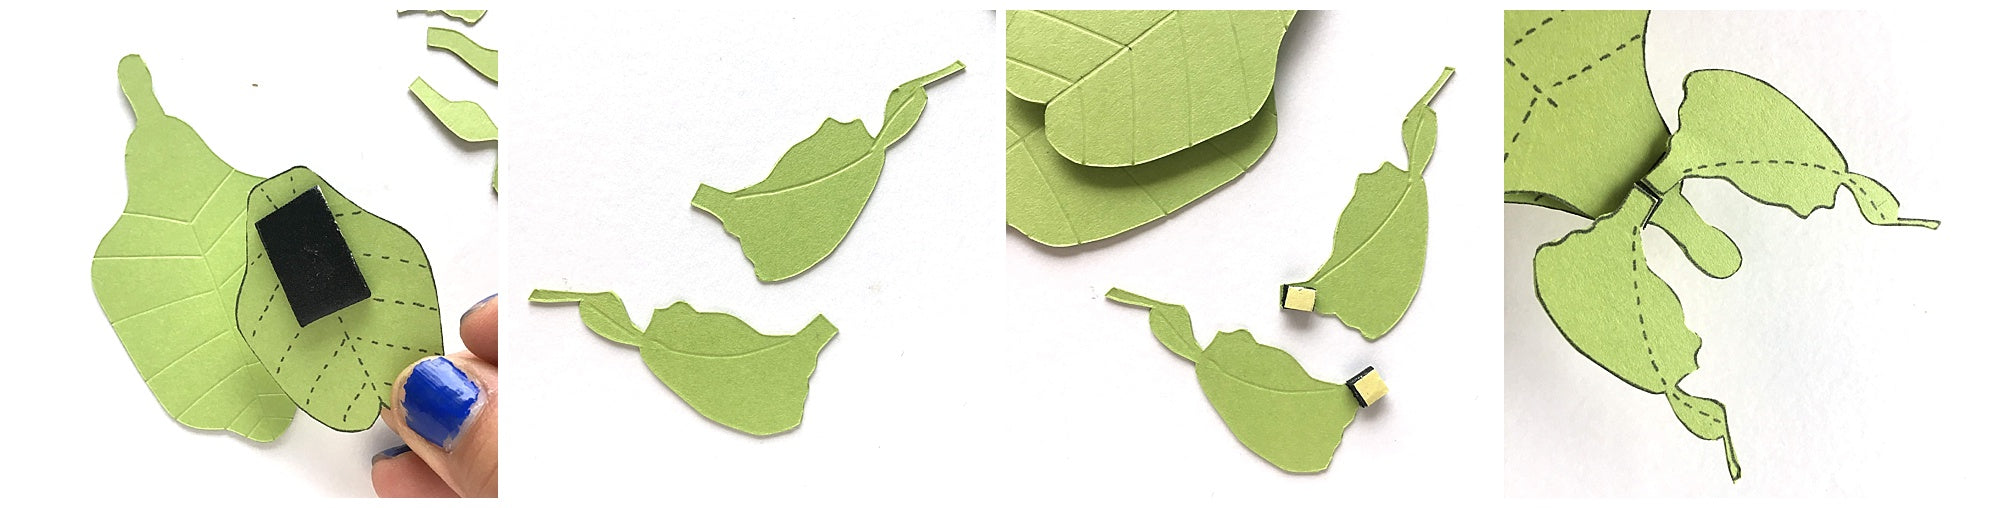 Cardstock Leaf Insect Paper Sculpture Assembly